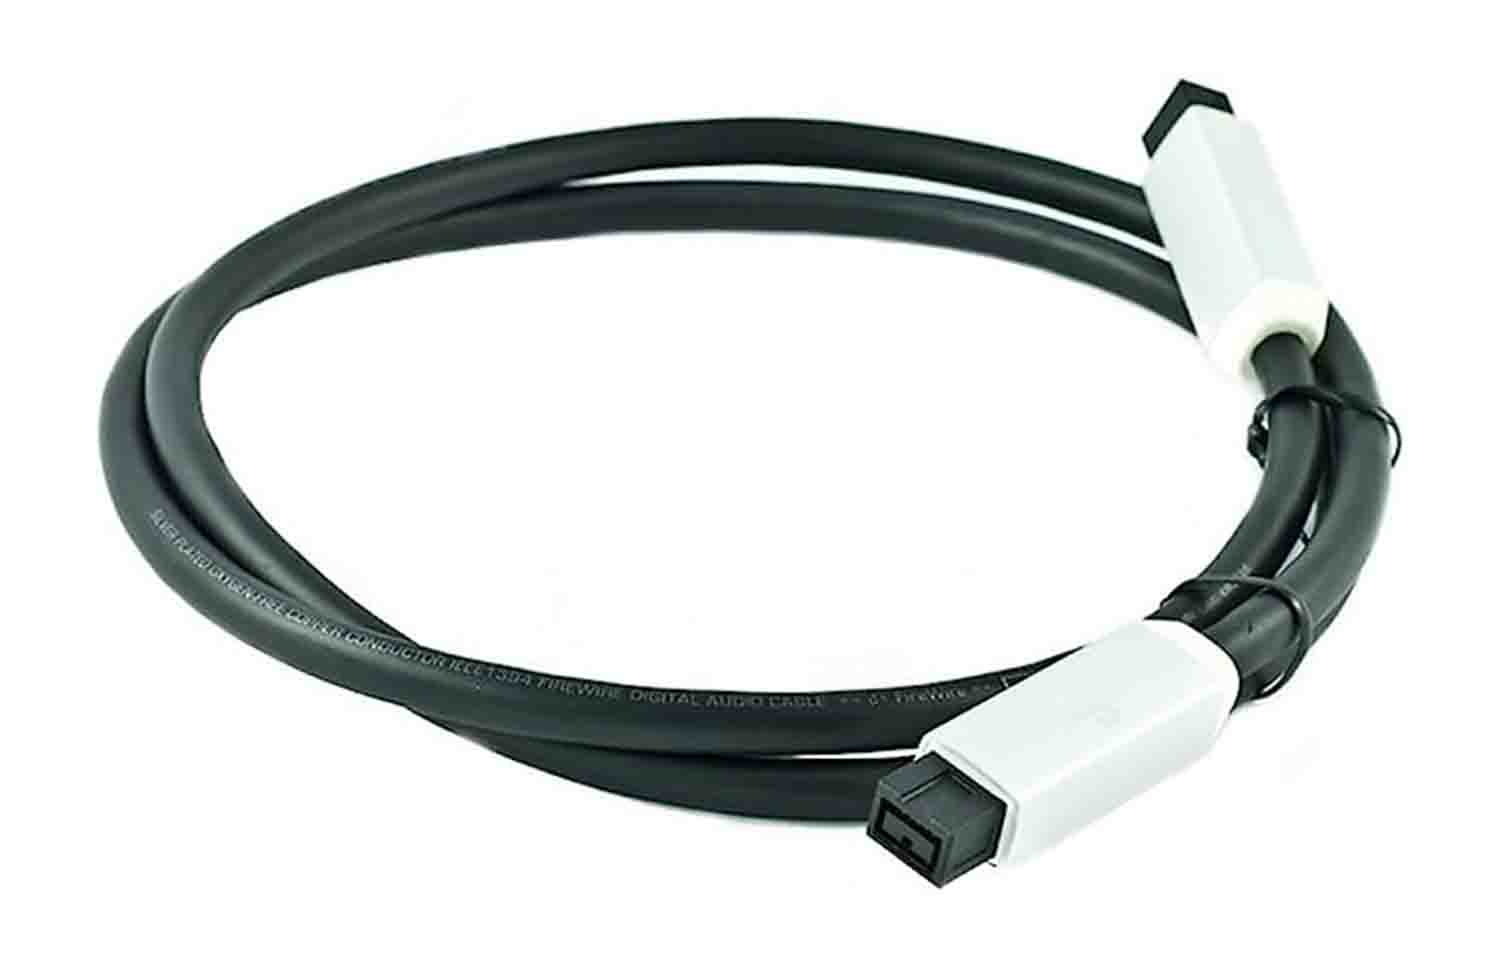 Oyaide Neo d+ Series Firewire Cable 9pin to 9pin - 1 Meter - Hollywood DJ